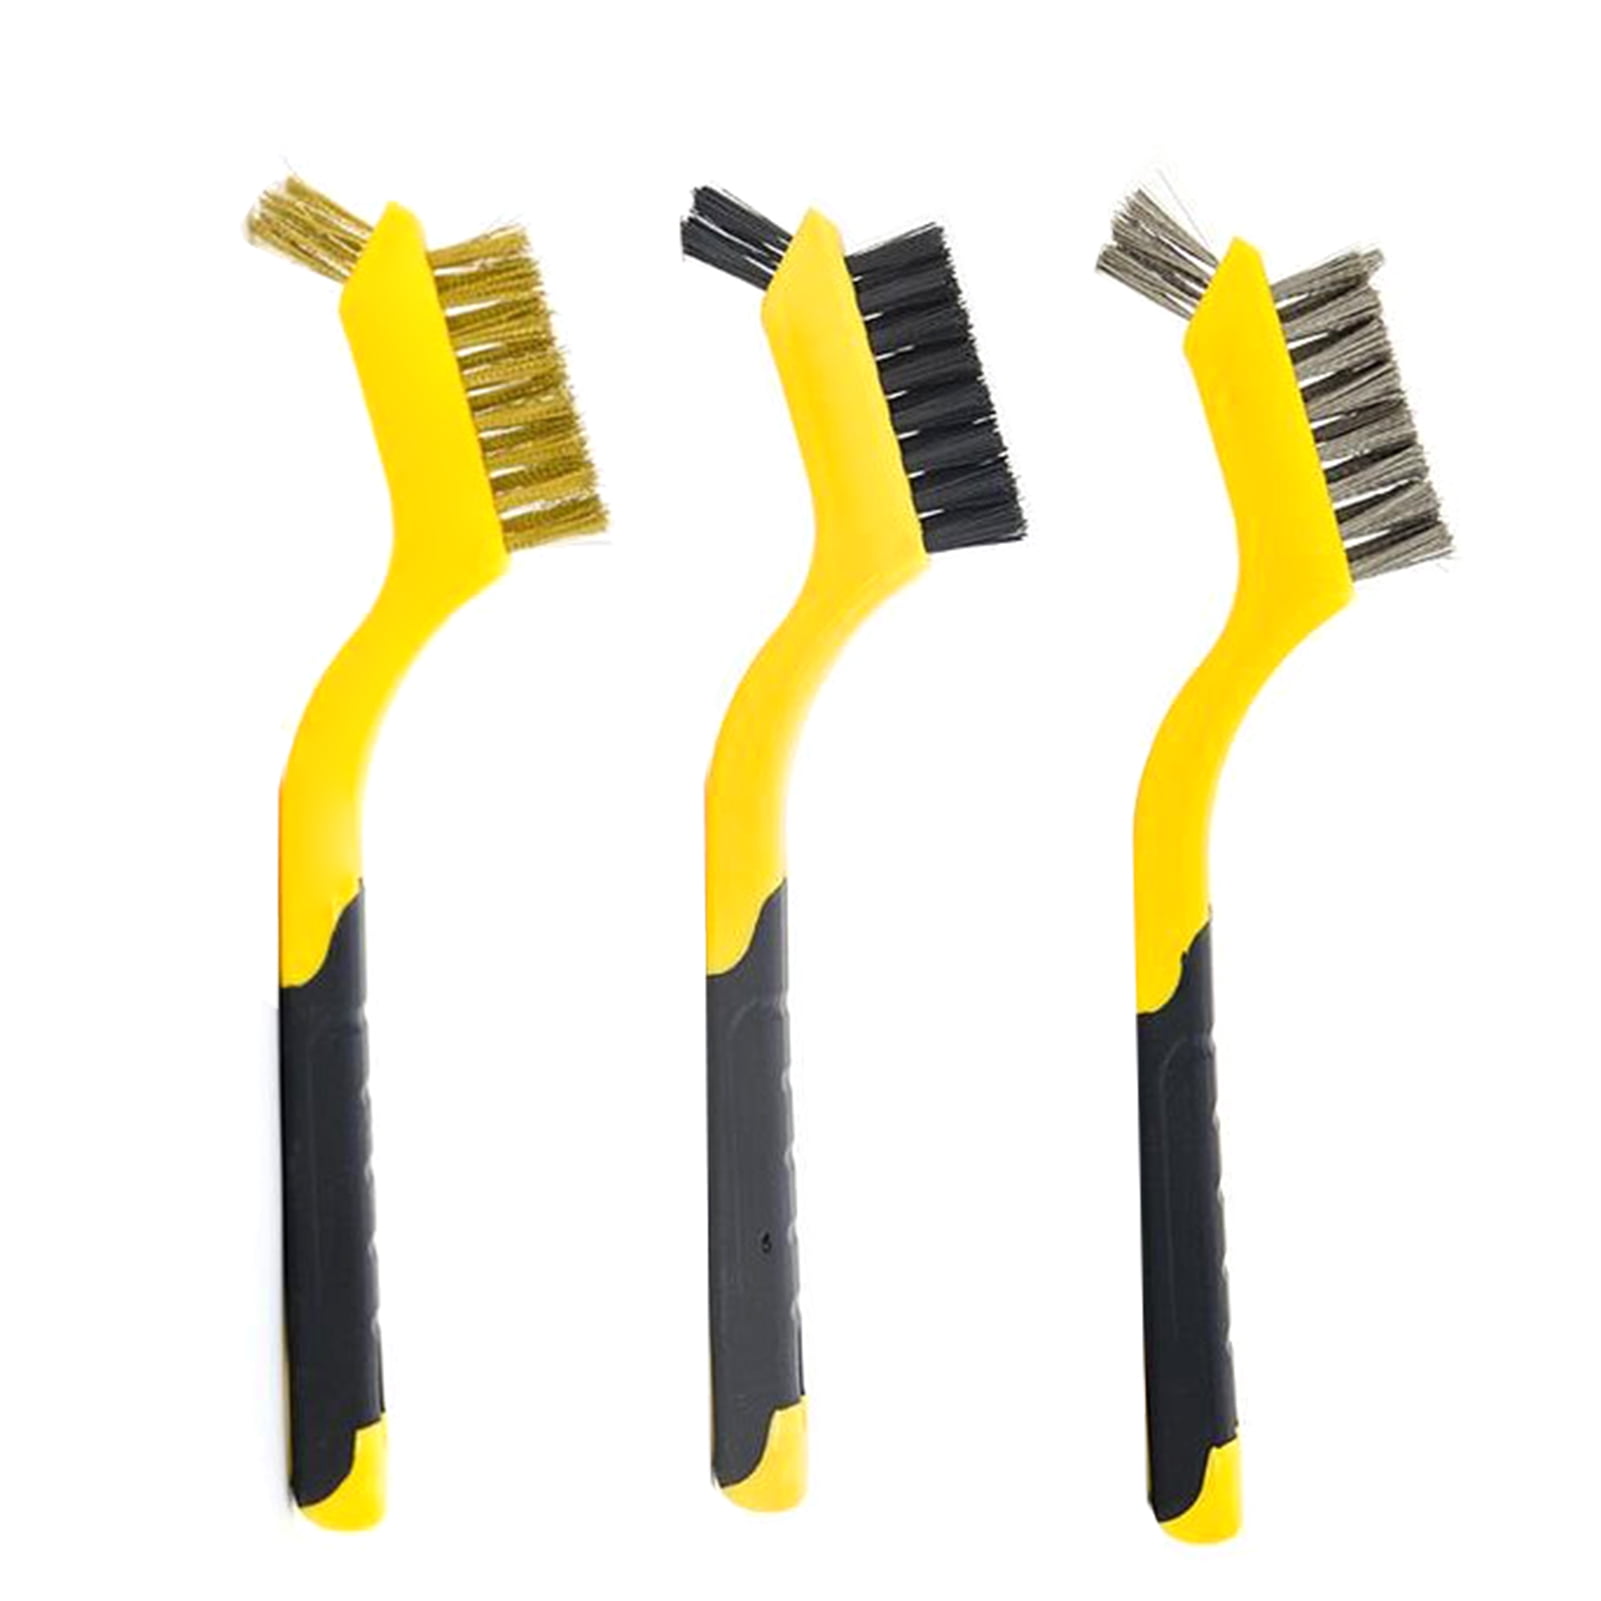 Wire Brush Steel Rust Brass Metal Paint Brushes Nylon Remover 3 Piece Heavy Duty